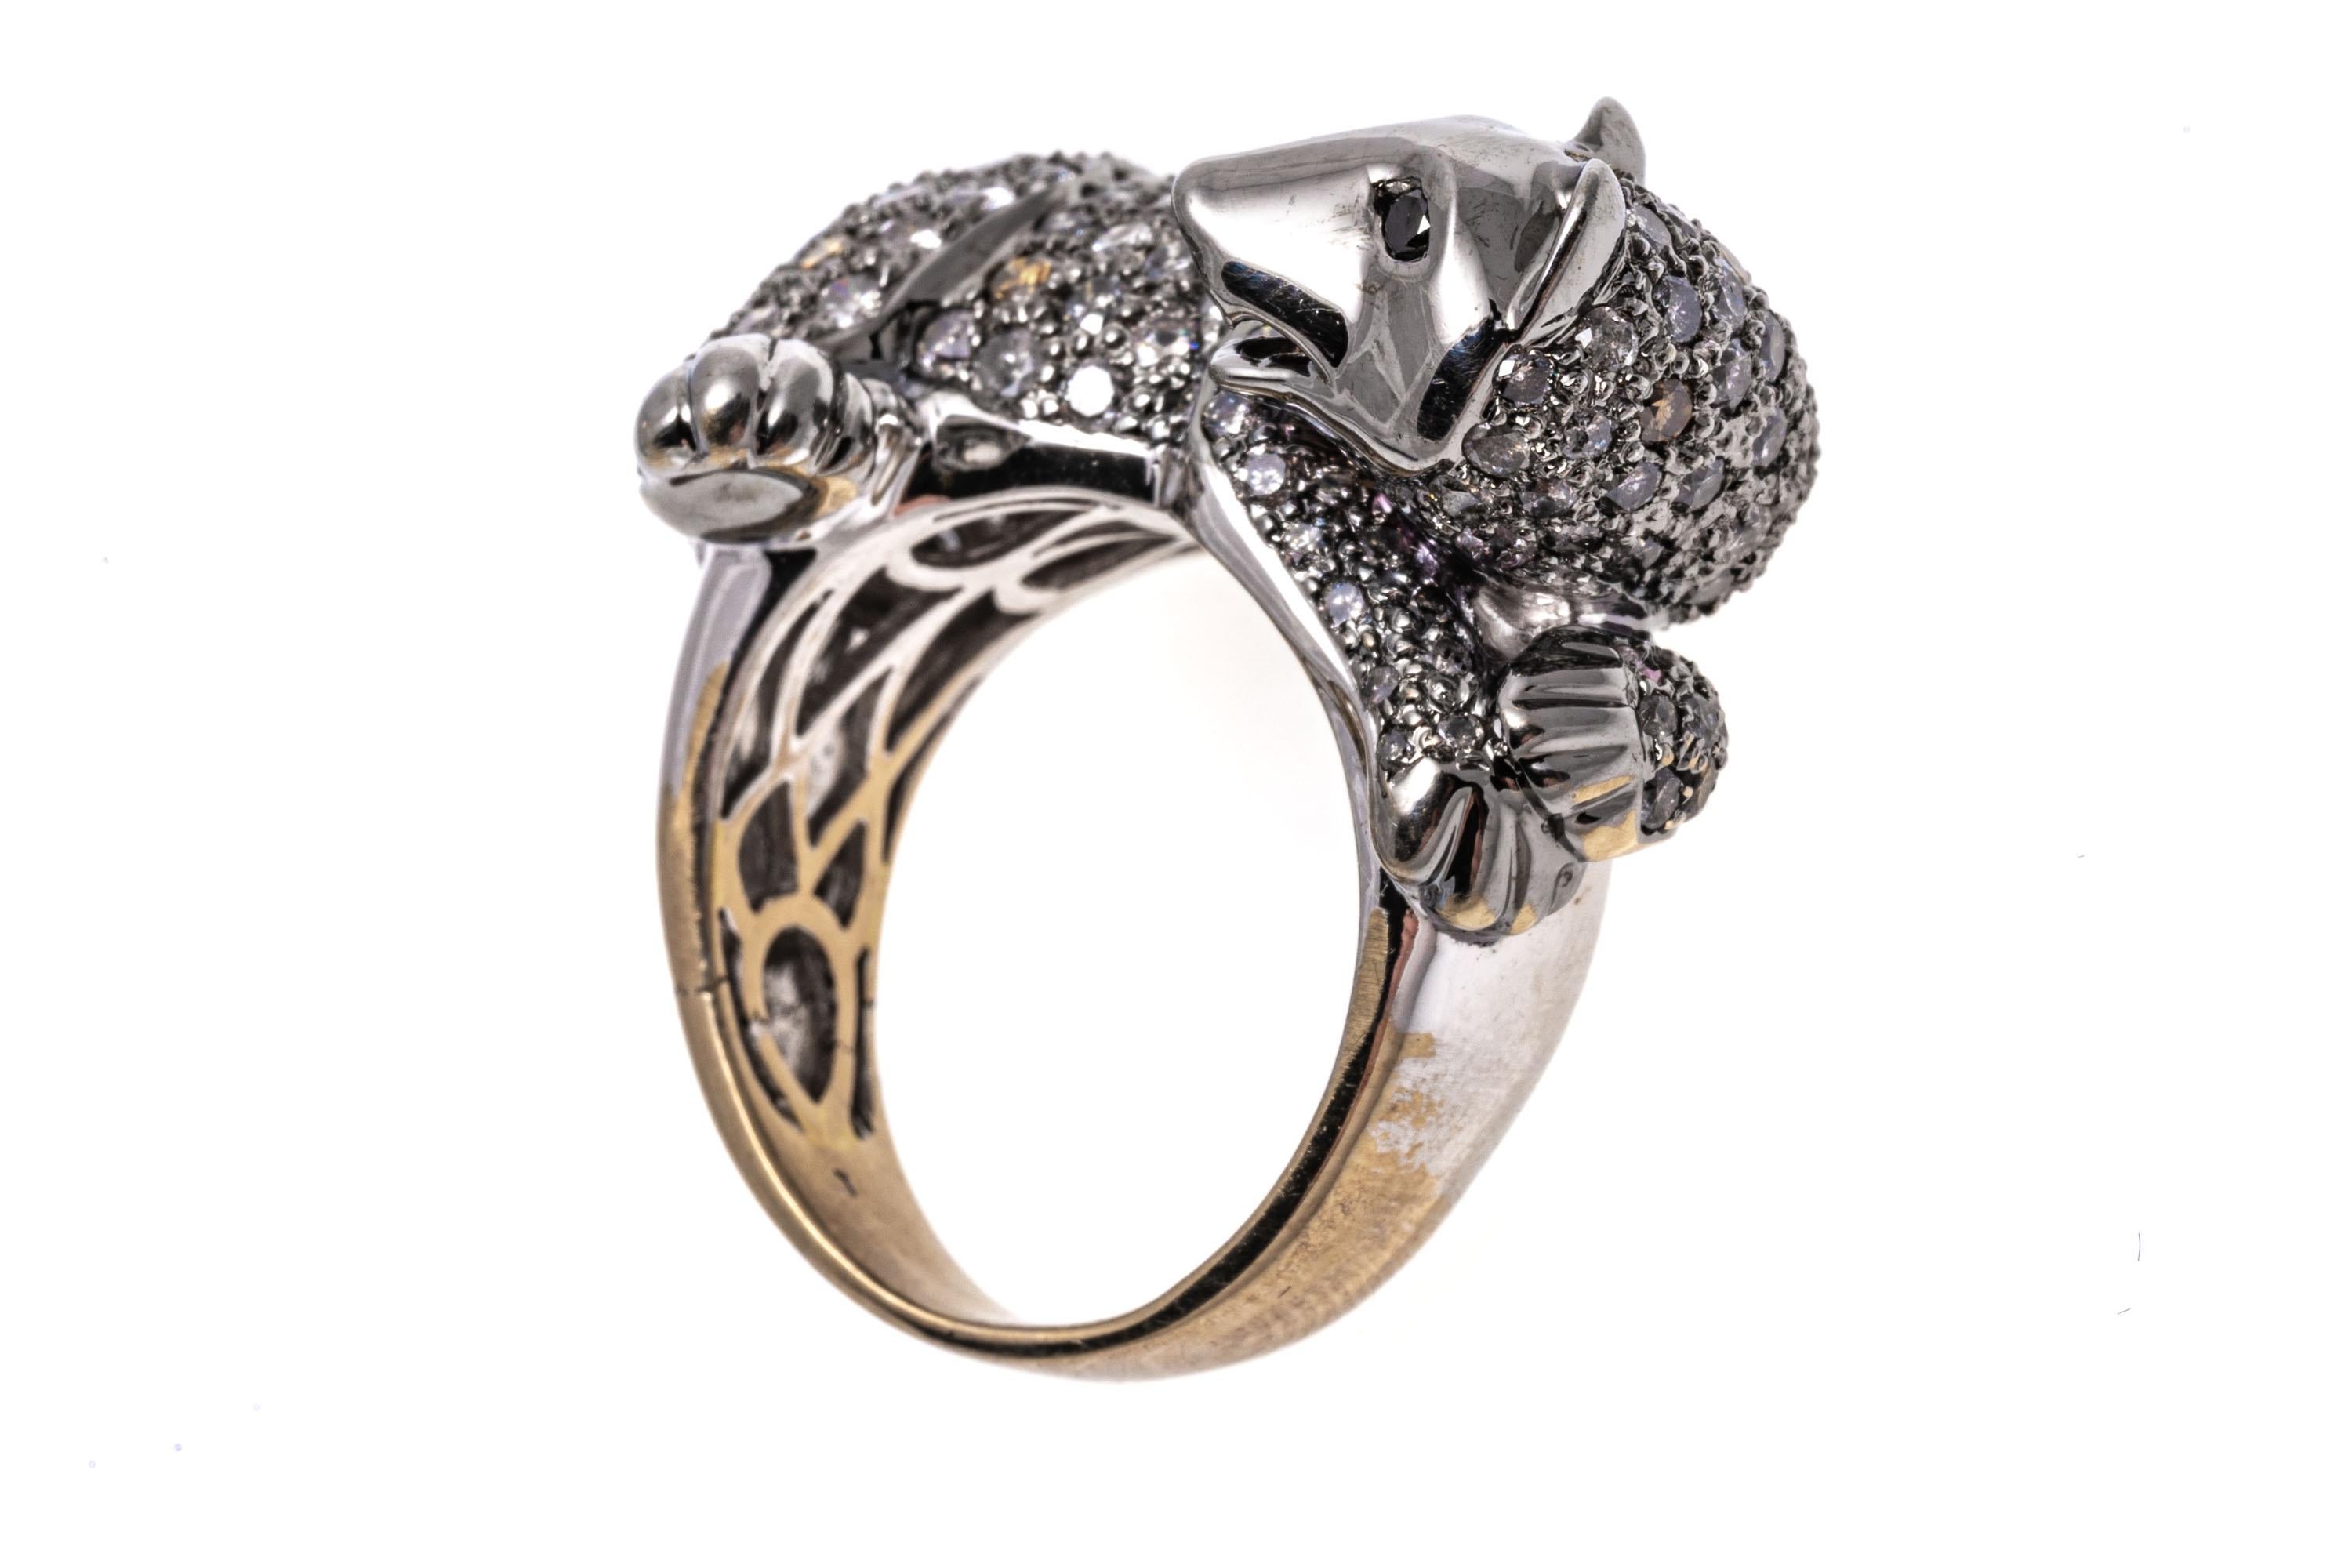 14k gold ring. This fun and quirky ring is a white gold, figural honey badger, pave set with round faceted,  diamonds, approximately 1.52 TCW. The ring is finished by round faceted, black diamond eyes, approximately 0.02 TCW and a yellow gold